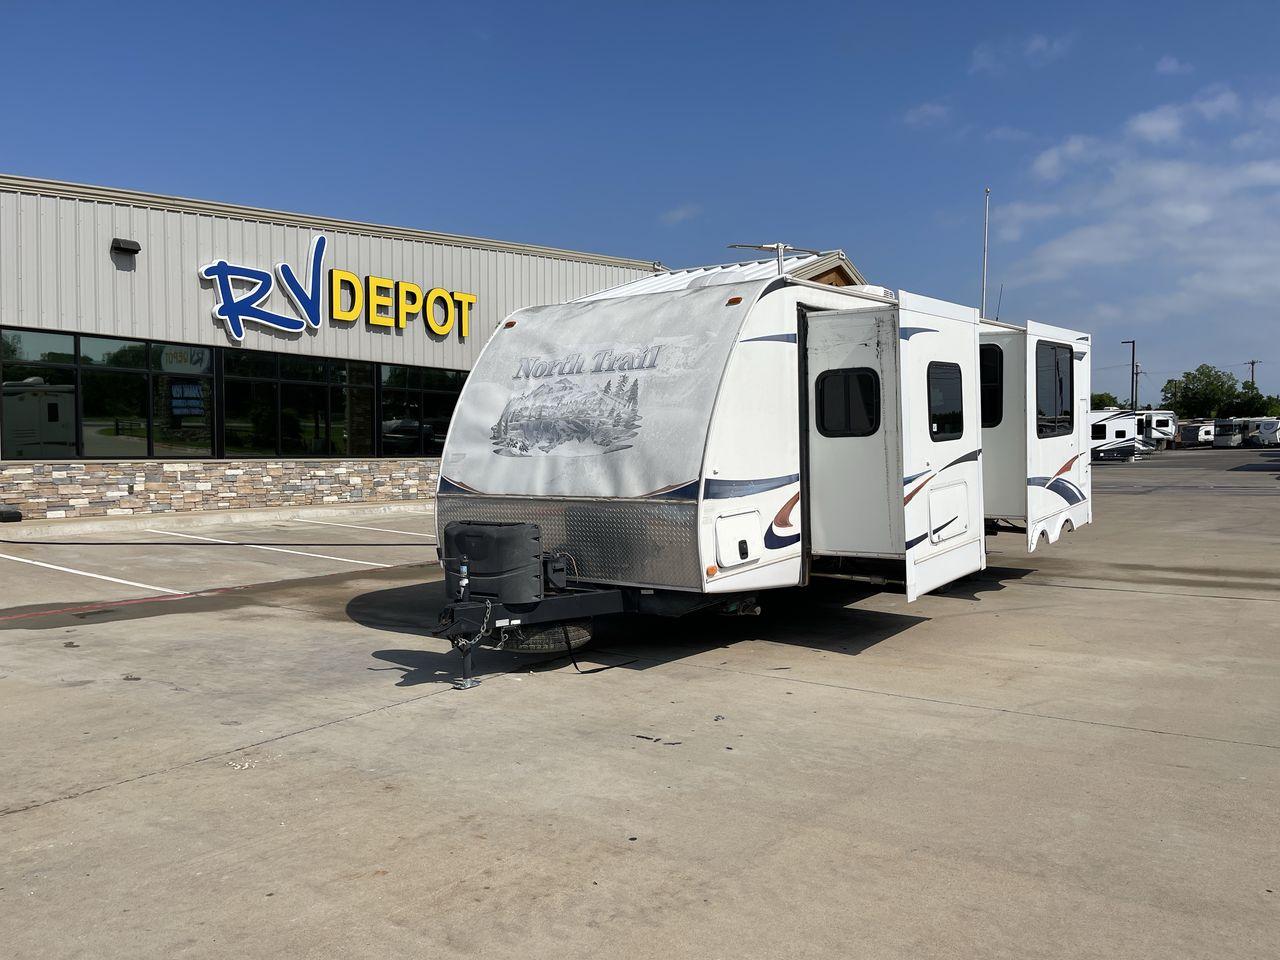 2011 WHITE HEARTLAND NORTH TRAIL 26B (5SFNB3225BE) , Length: 32.5 ft. | Dry Weight: 7,104 lbs. | Gross Weight: 8,600 lbs. | Slides: 2 transmission, located at 4319 N Main Street, Cleburne, TX, 76033, (817) 221-0660, 32.435829, -97.384178 - Enjoy a spontaneous weekend getaway in this 2011 Heartland North Trail 26BRSS Travel Trailer! It is a dual-axle steel wheel setup measuring 32.5 ft. in length and 10.83 ft. in height. It has a dry weight of 7,104 lbs. and a GVWR of 8,600 lbs. It is equipped with automatic heating and cooling rated a - Photo #0